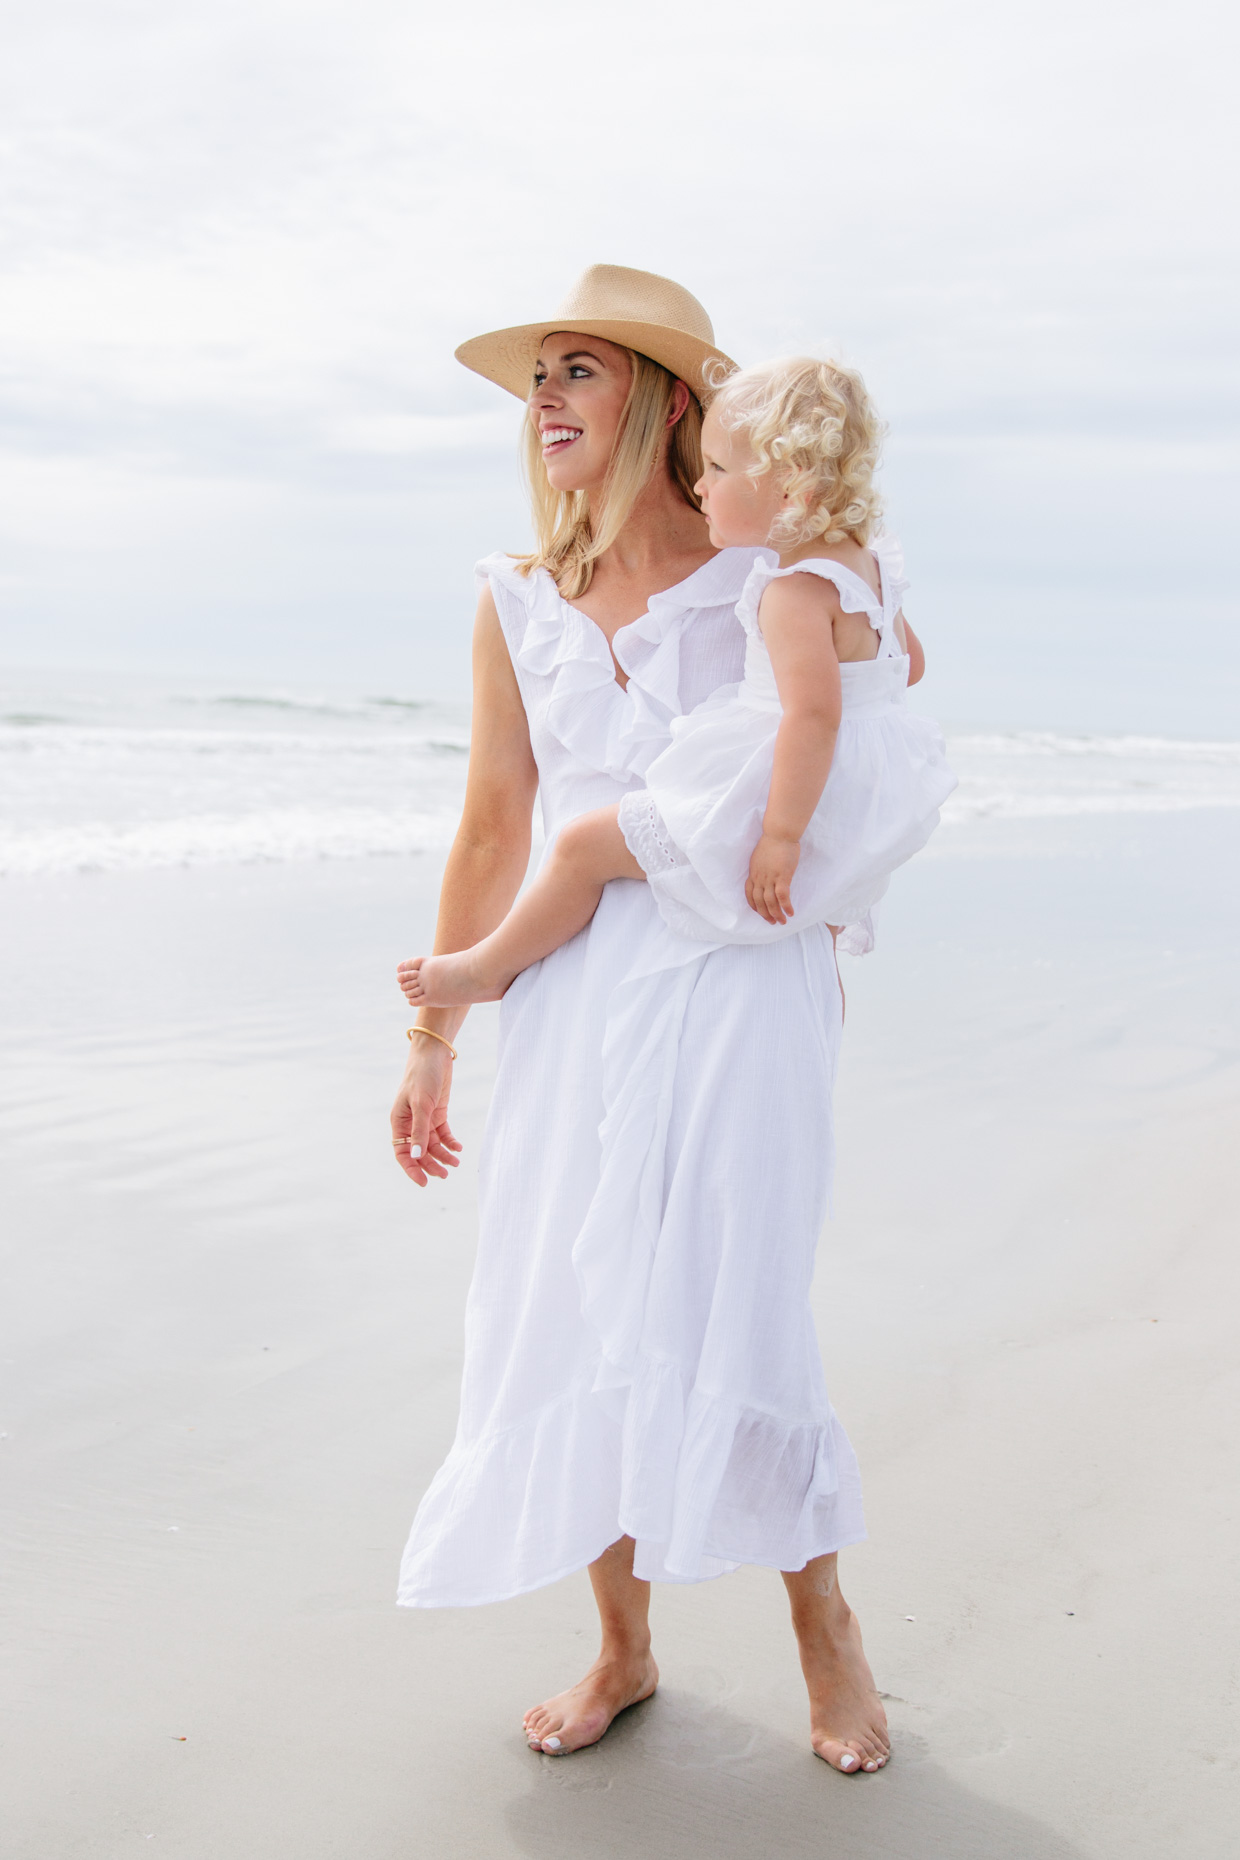 Mommy ☀ Me White Dresses on the Beach ...